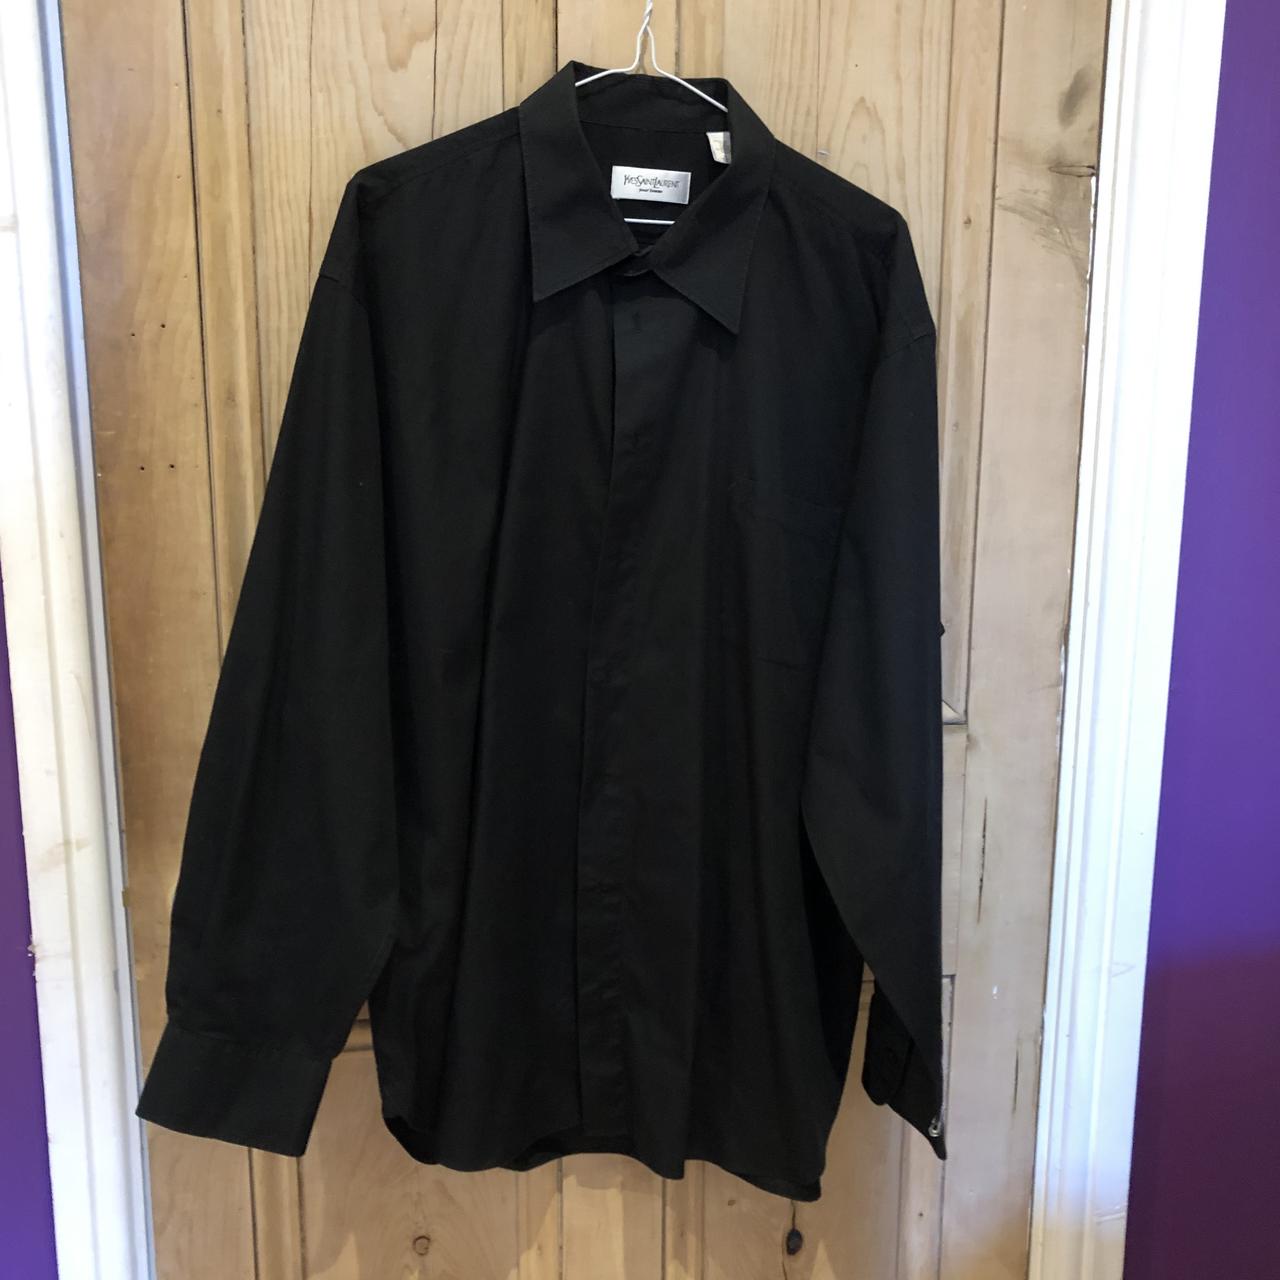 Men’s xl ysl shirt. Great condition no marks or... - Depop